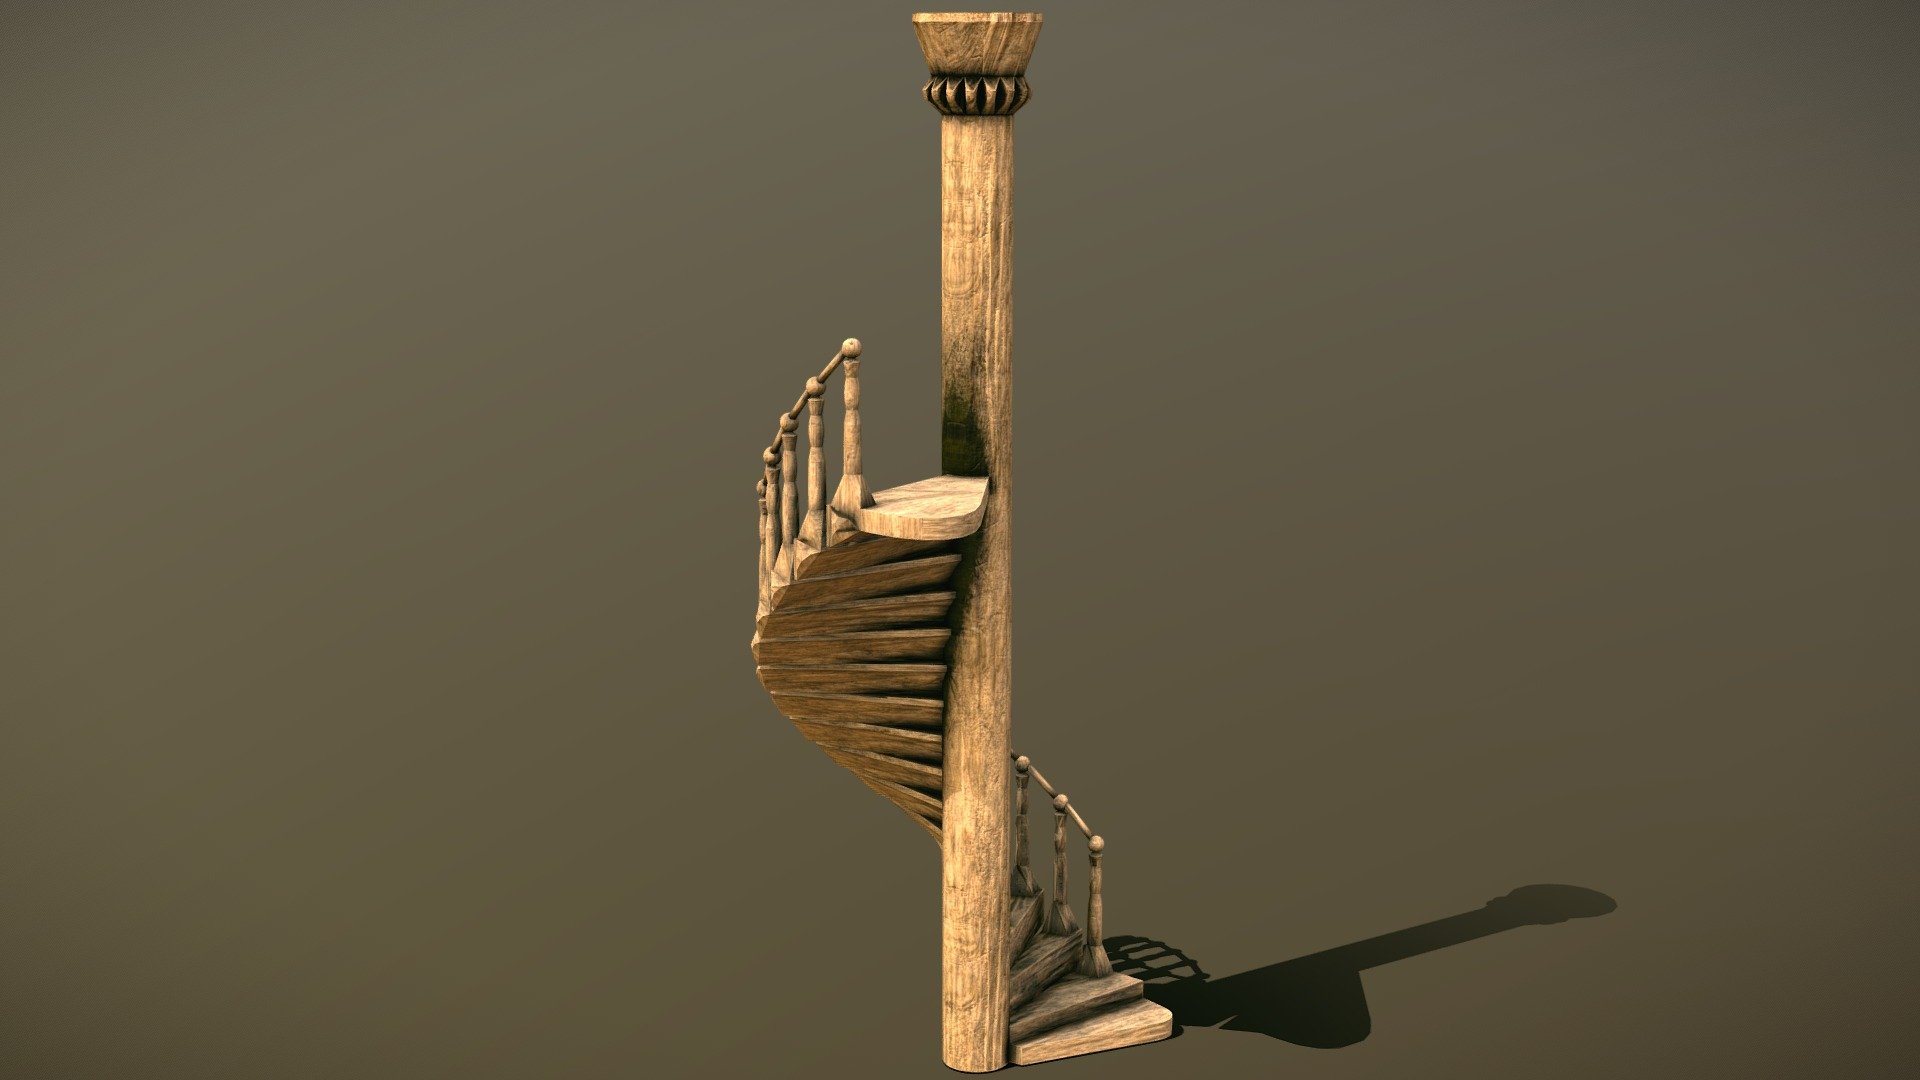 Custom spiral staircase (antique stilized)

Metal spiral staircase (steampunk stylized)

Blender (2.92), Substance Painter (2020.2.2) - Dilapidated wooden spiral staircase (old wood) - Download Free 3D model by Nortenko Dmytro (@leondp) 3d model